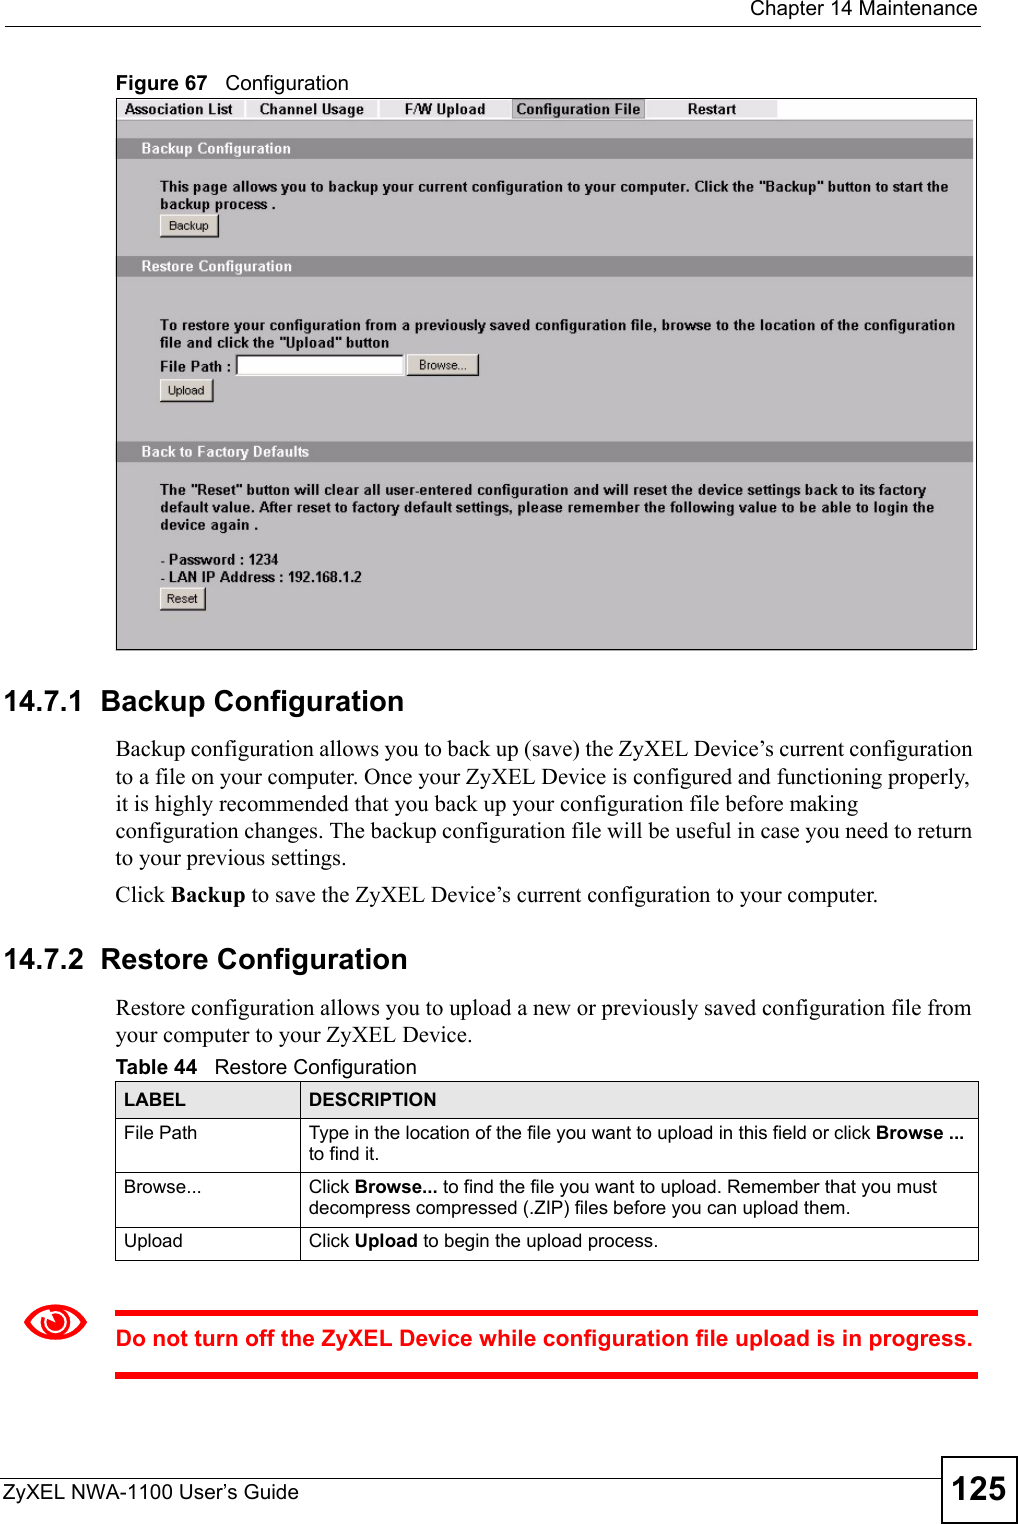  Chapter 14 MaintenanceZyXEL NWA-1100 User’s Guide 125Figure 67   Configuration14.7.1  Backup ConfigurationBackup configuration allows you to back up (save) the ZyXEL Device’s current configuration to a file on your computer. Once your ZyXEL Device is configured and functioning properly, it is highly recommended that you back up your configuration file before making configuration changes. The backup configuration file will be useful in case you need to return to your previous settings. Click Backup to save the ZyXEL Device’s current configuration to your computer.14.7.2  Restore Configuration Restore configuration allows you to upload a new or previously saved configuration file from your computer to your ZyXEL Device.1Do not turn off the ZyXEL Device while configuration file upload is in progress.Table 44   Restore ConfigurationLABEL DESCRIPTIONFile Path  Type in the location of the file you want to upload in this field or click Browse ... to find it.Browse...  Click Browse... to find the file you want to upload. Remember that you must decompress compressed (.ZIP) files before you can upload them. Upload  Click Upload to begin the upload process.